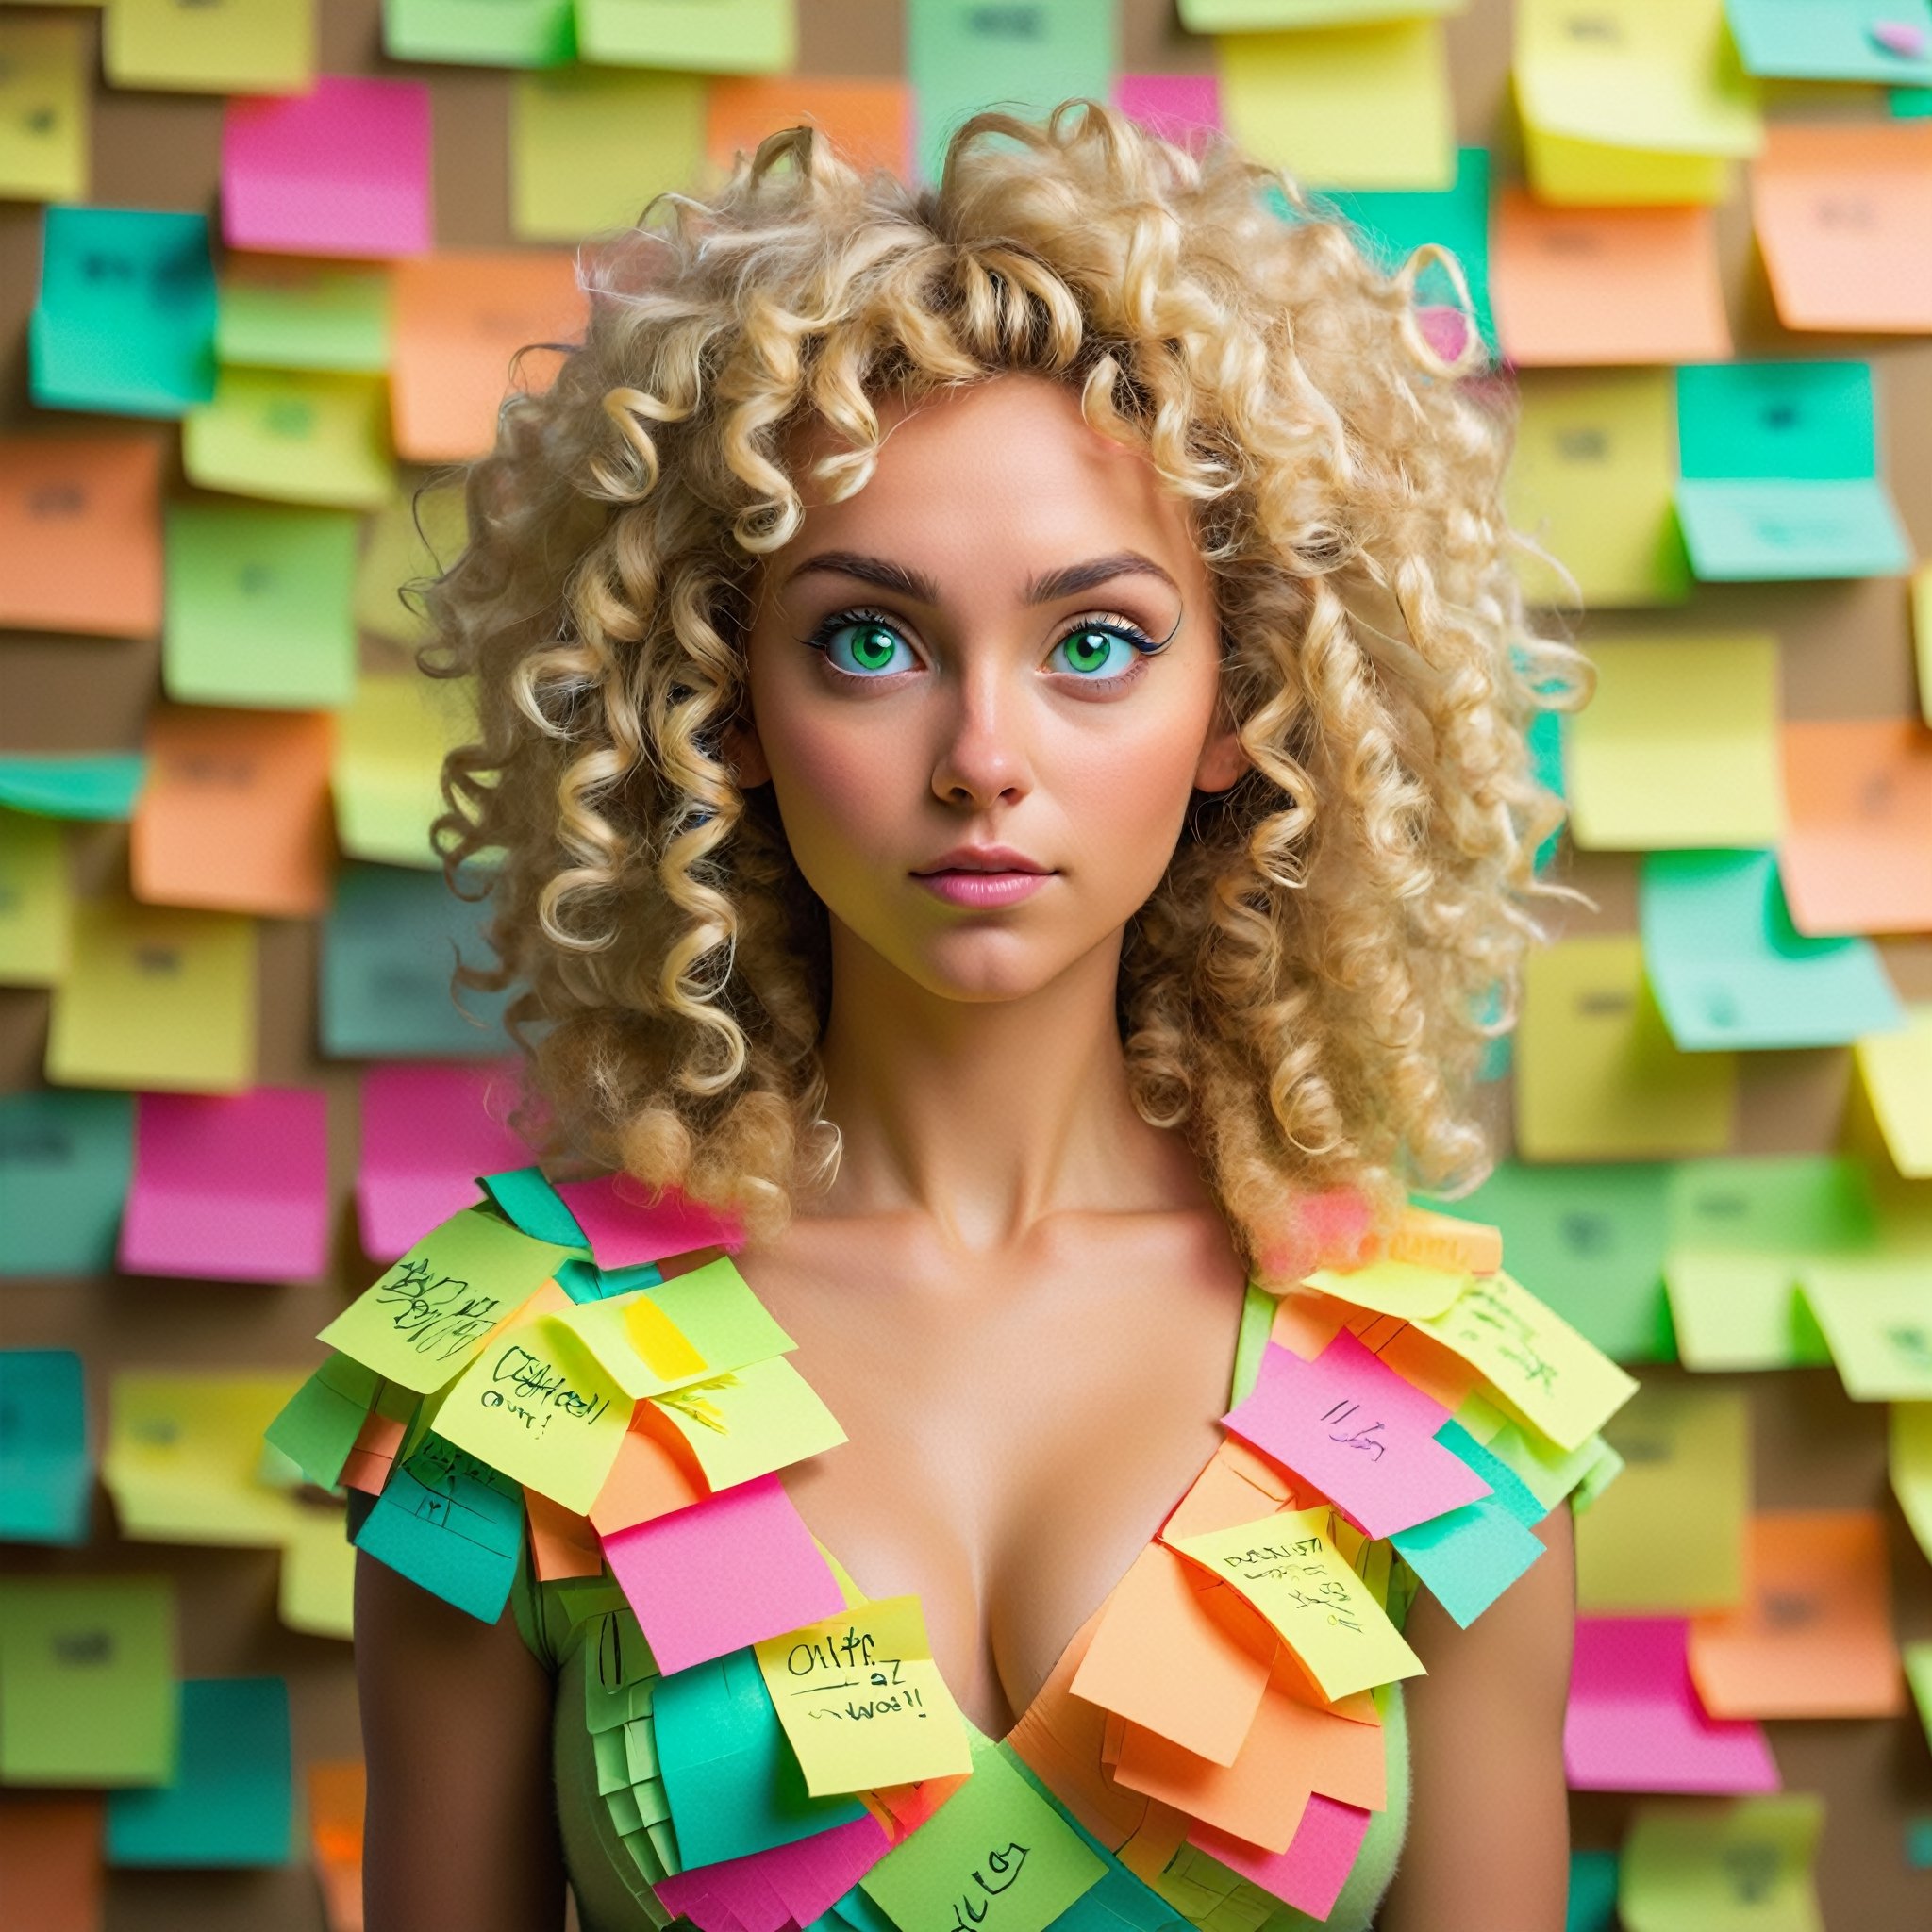 beautiful woman with blond curly hair and fluffy, looking off into the distance with green eyes, hair covered in multi-colored post-it notes, outfit made out of post-it notes, post-it notes covering chest and arms, background has two walls with multi-colored post it notes
,text logo